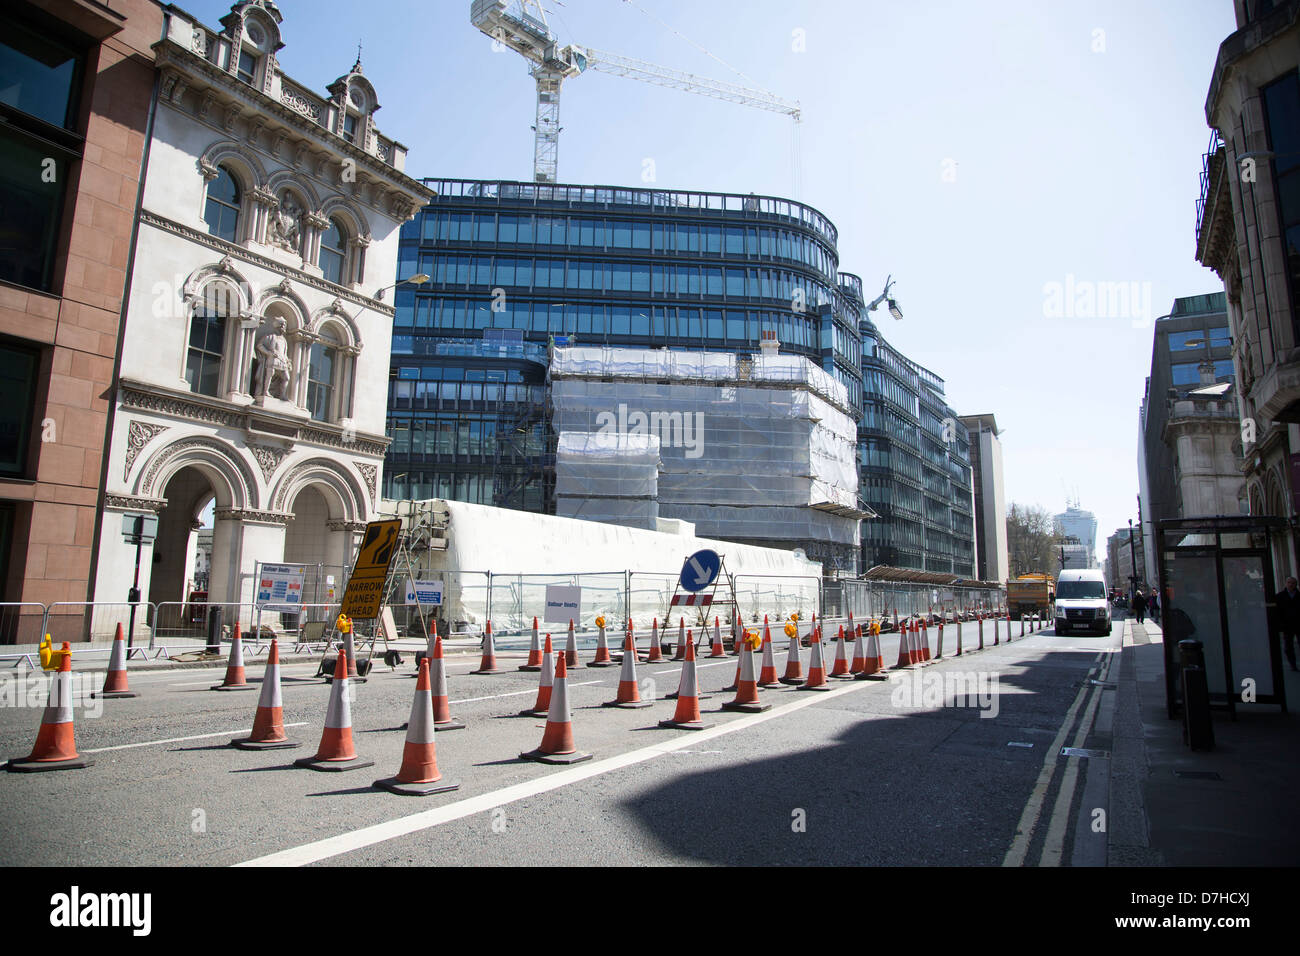 Holborn viaduct coned off for roadworks building works Stock Photo